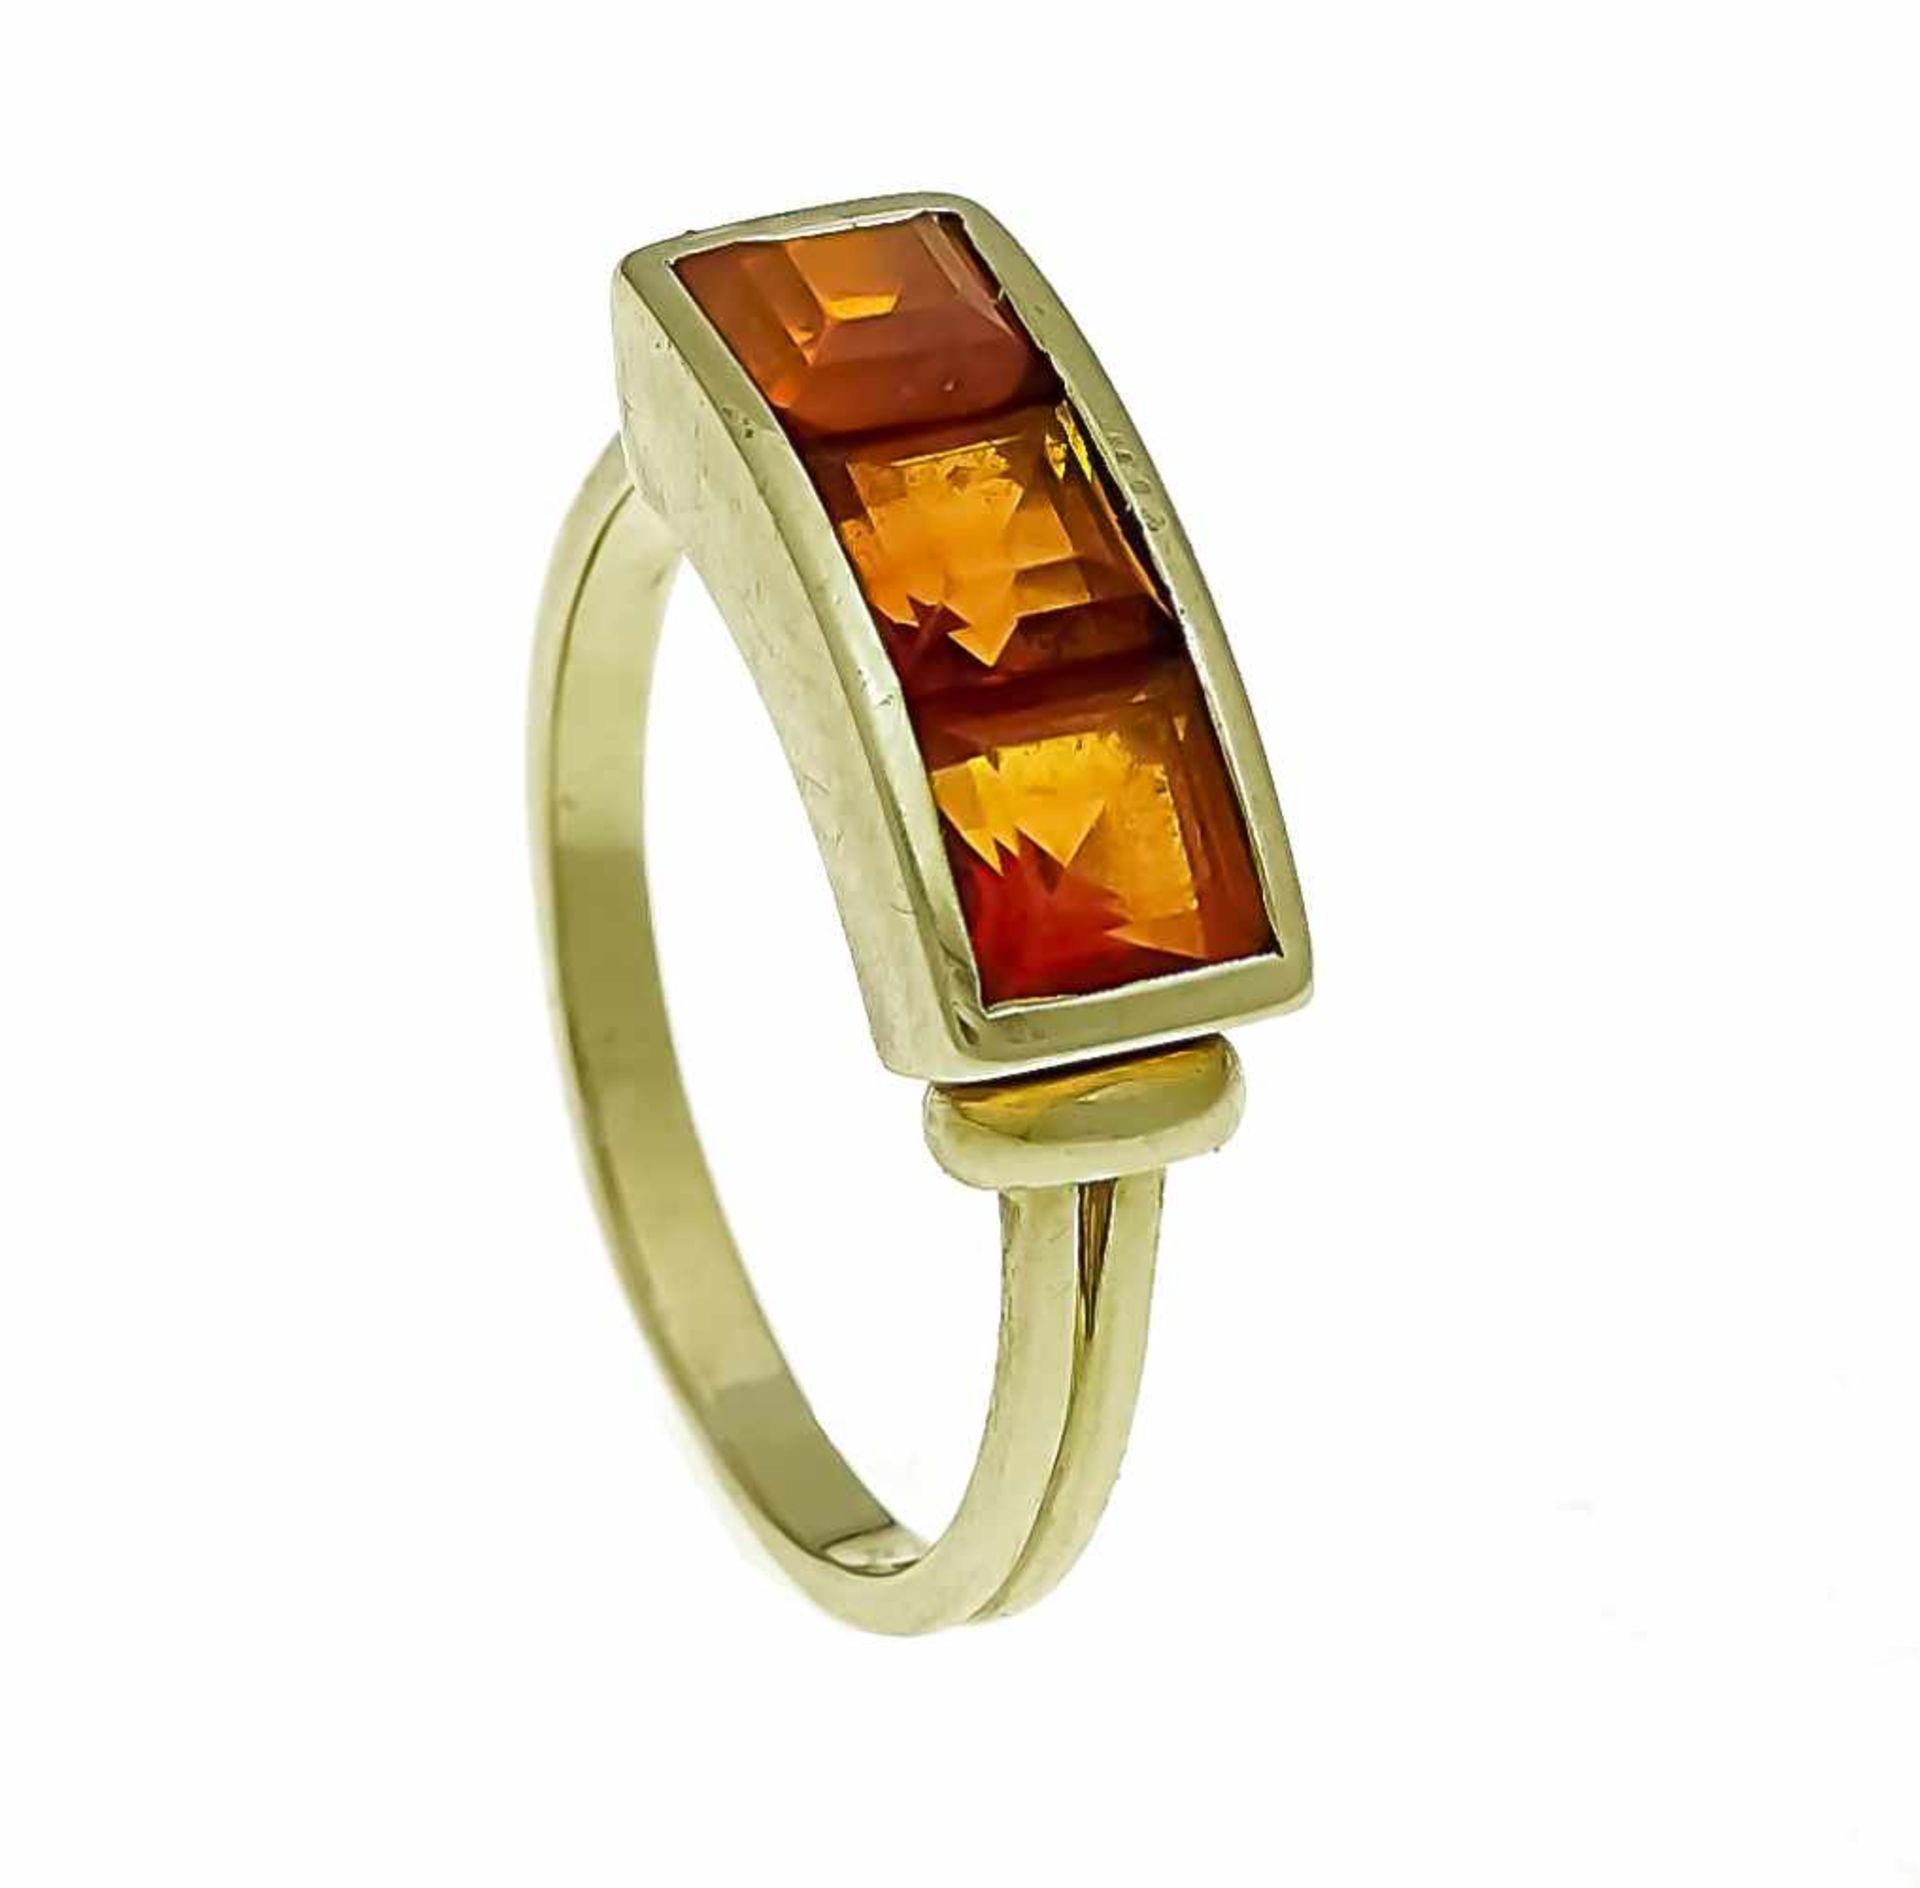 Citrine ring GG 585/000 with 3 facets. Citrine carrés 5 mm, ring size 56, 4.7 g<